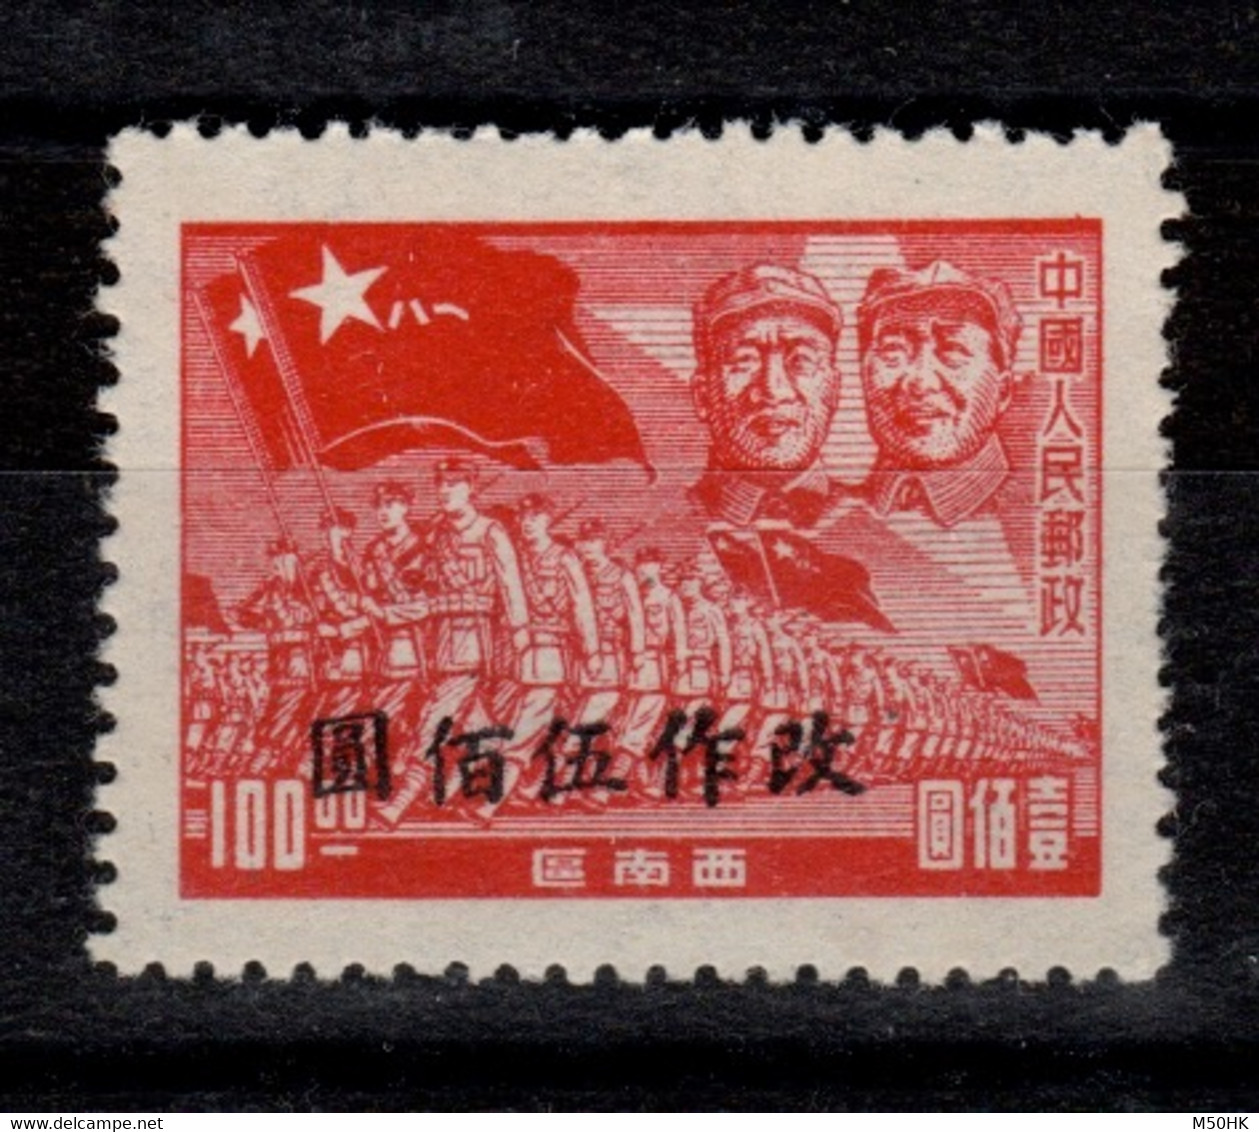 Chine Du Sud Ouest - Timbre Surchargé De 1949 / 1950 NSG MNG As Issued - South-Western China 1949-50